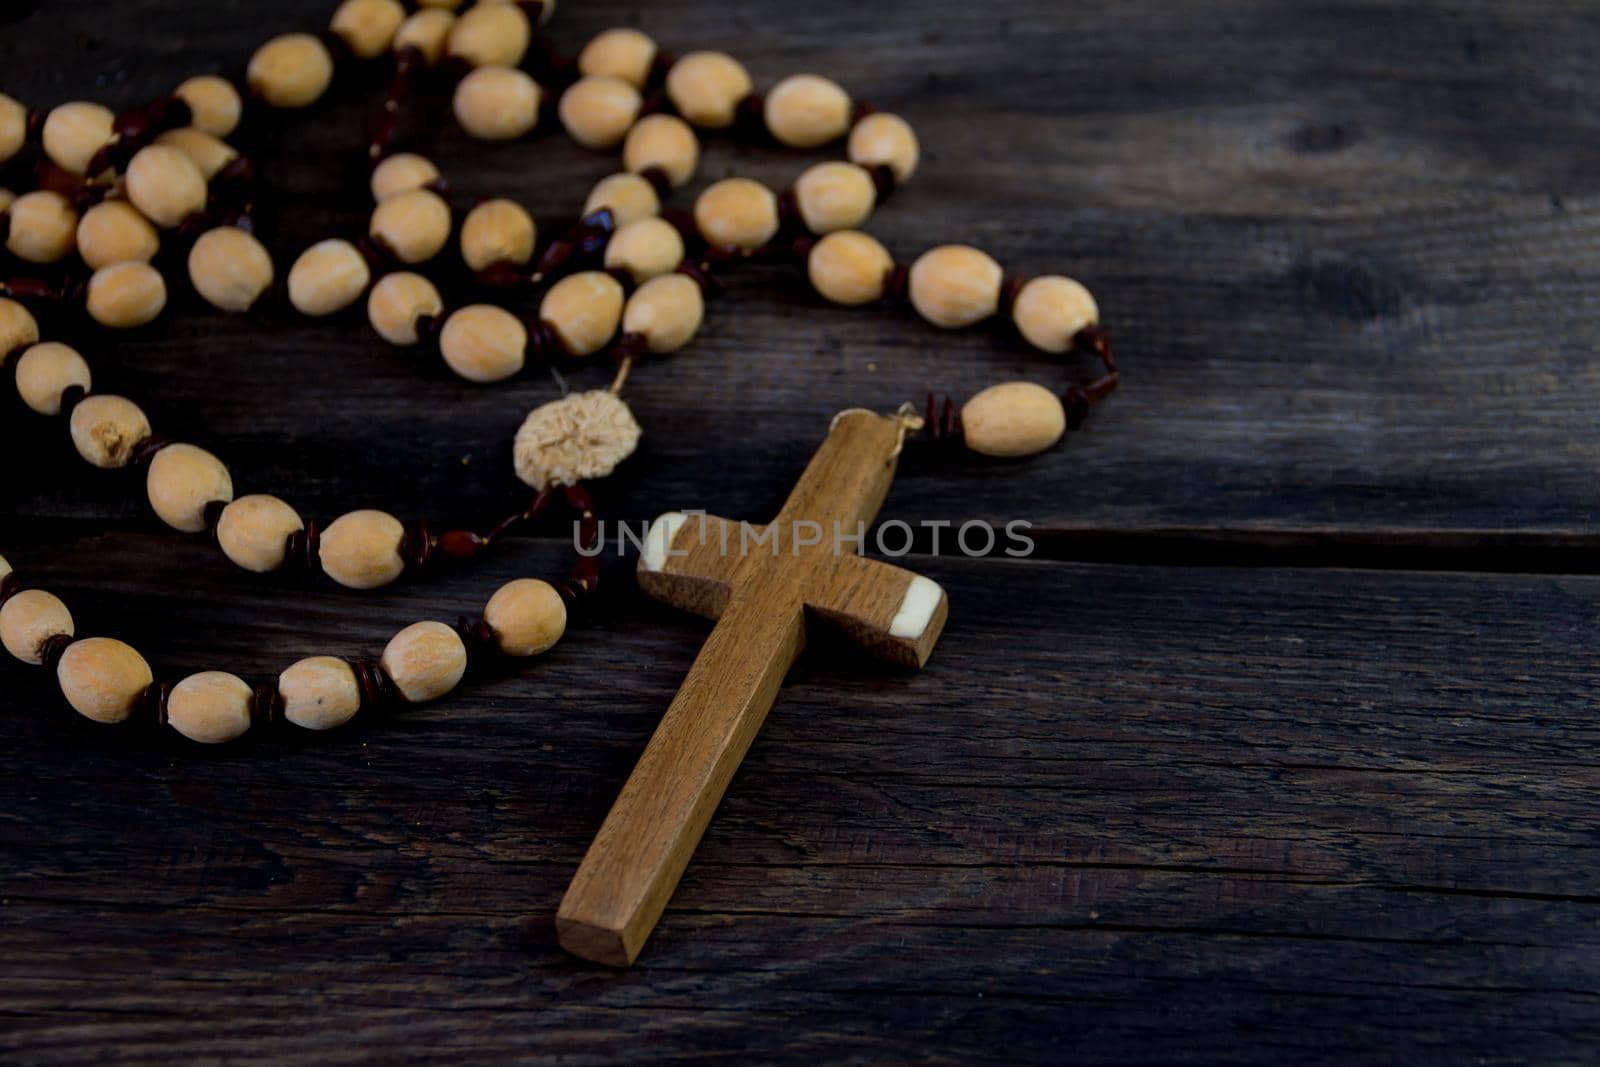 detail of the cross of a catholic rosary by GabrielaBertolini